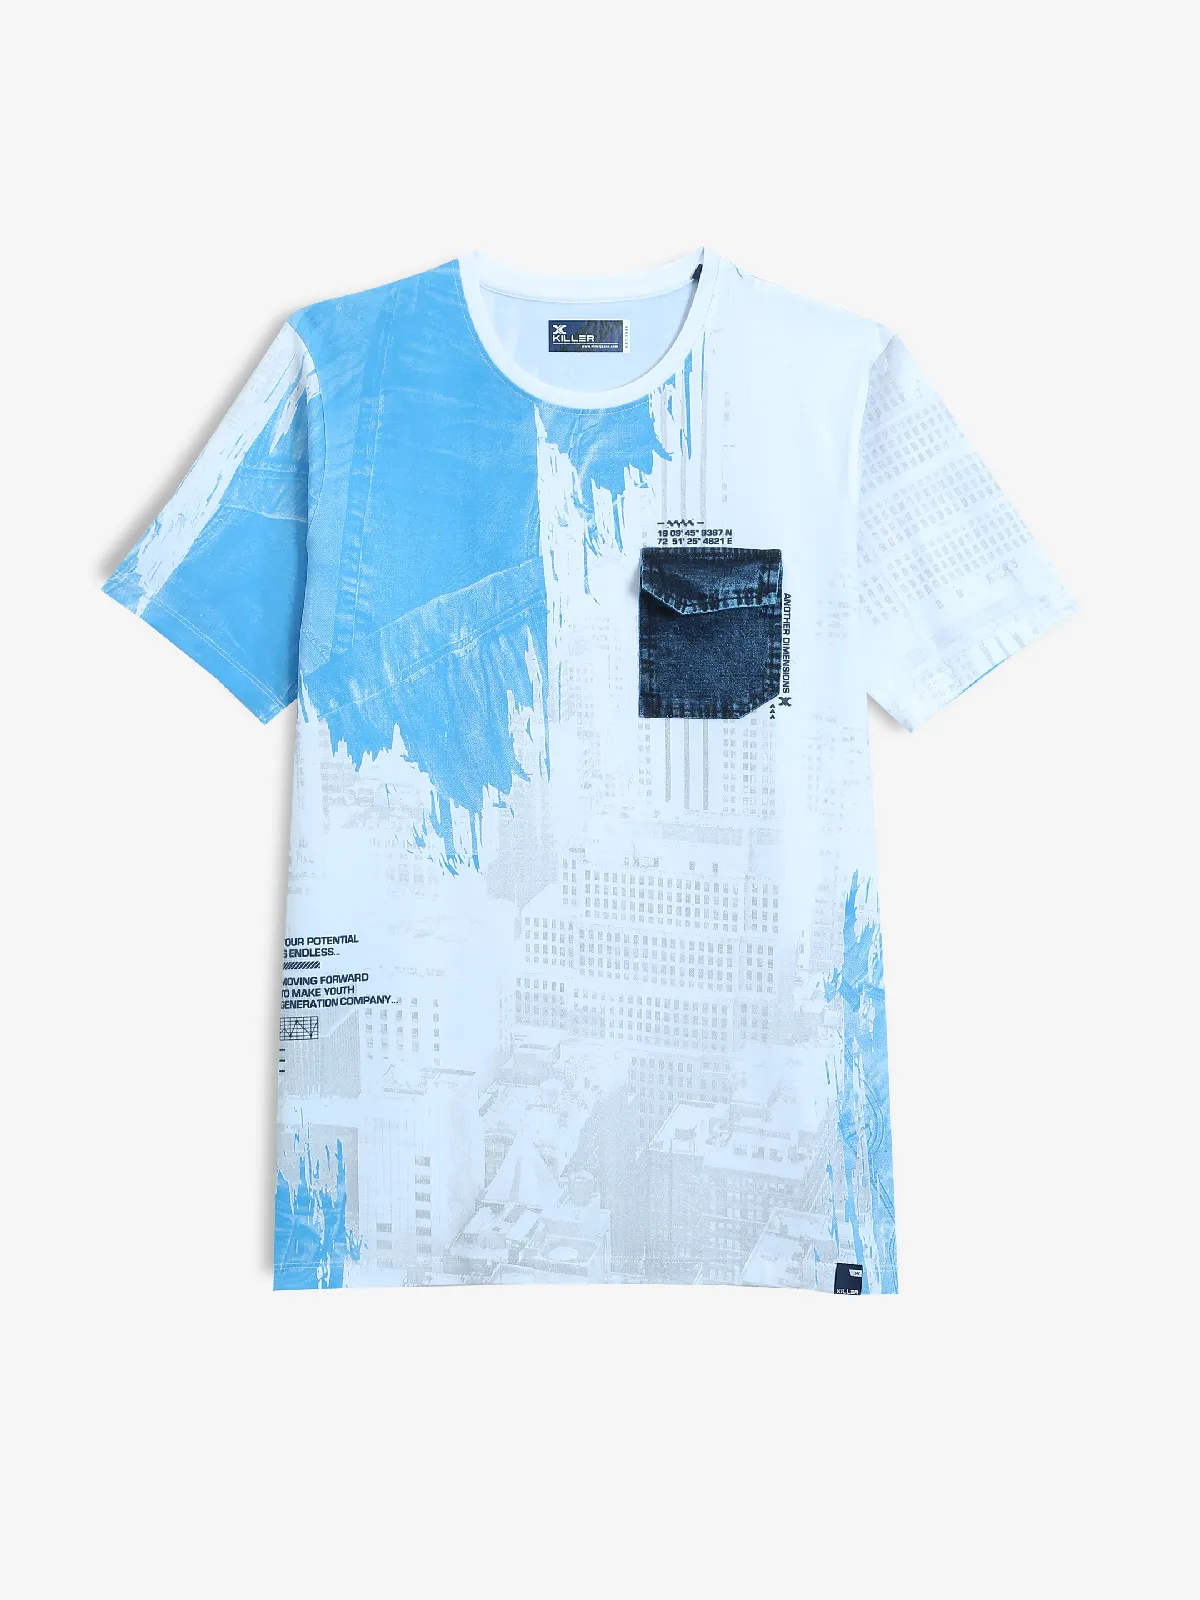 KILLER blue and white cotton printed t-shirt